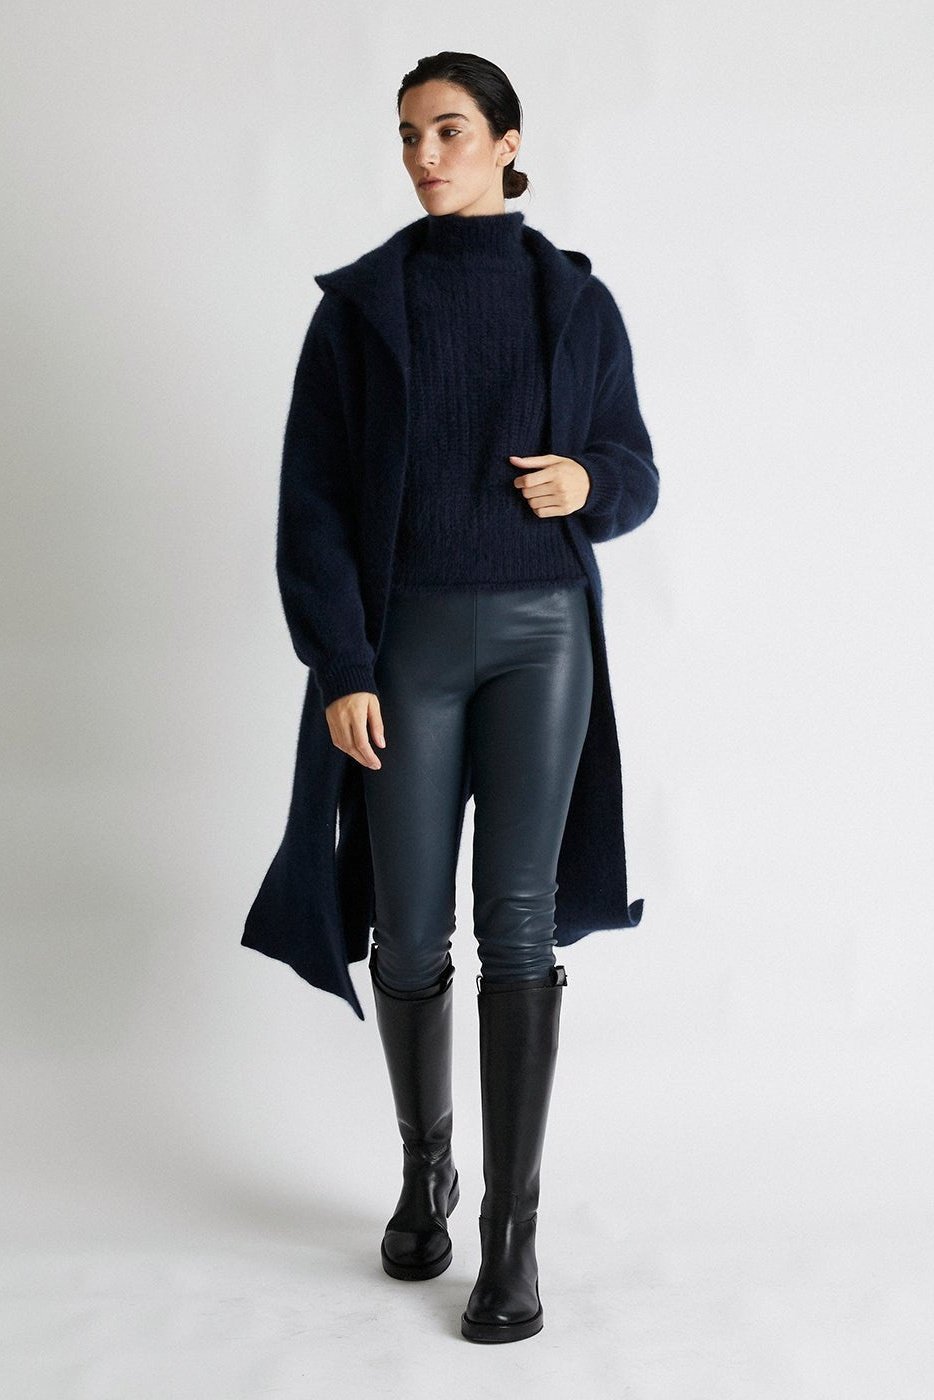 + Beryll Pure Cashmere Coat with Hood | Navy Blue - +Beryll Cashmere Coat with Hood | Navy Blue - +Beryll Worn By Good People